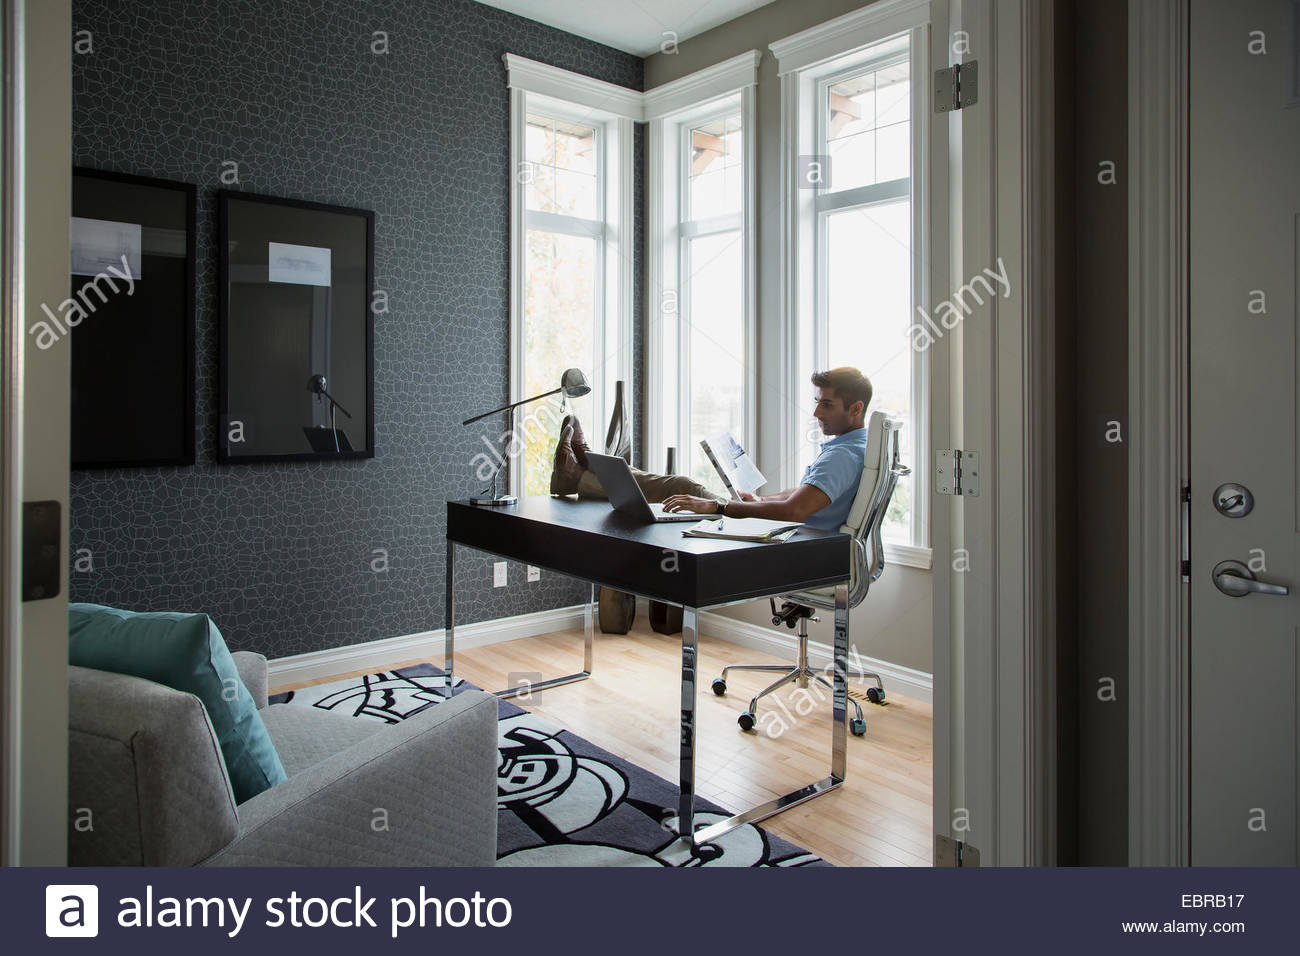 Man reading with feet up in home office Stock Photo